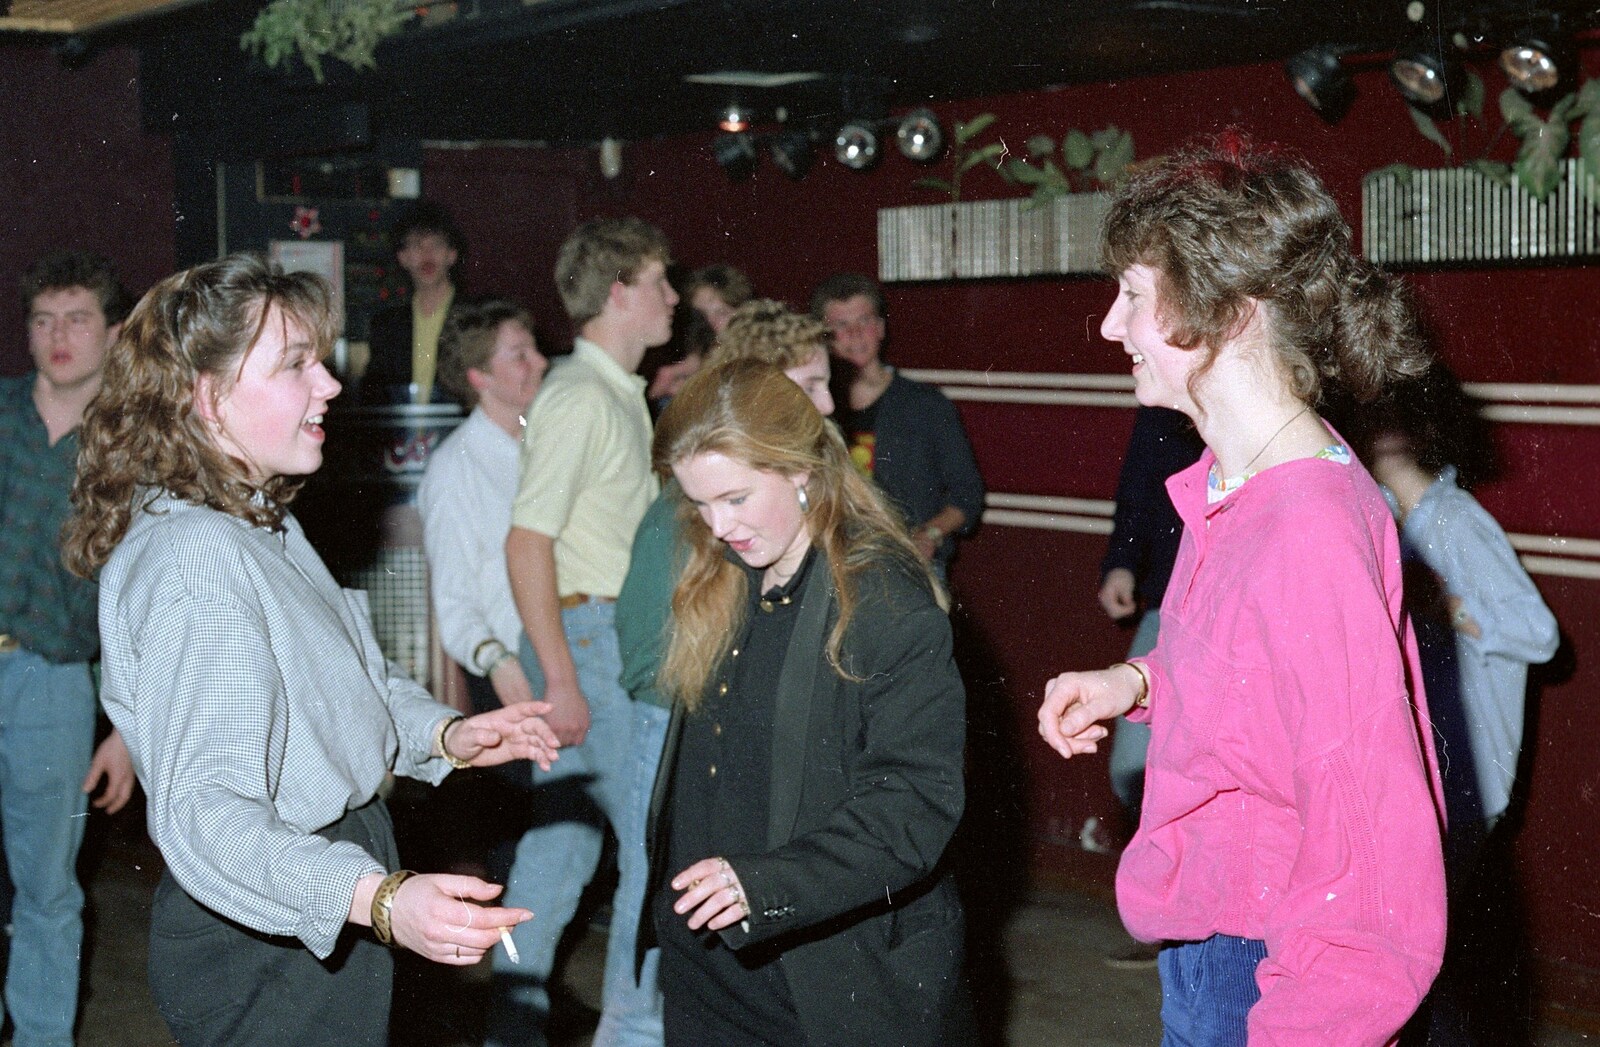 More dancing from Uni: A Party in Snobs Nightclub, Mayflower Street, Plymouth - 18th October 1986